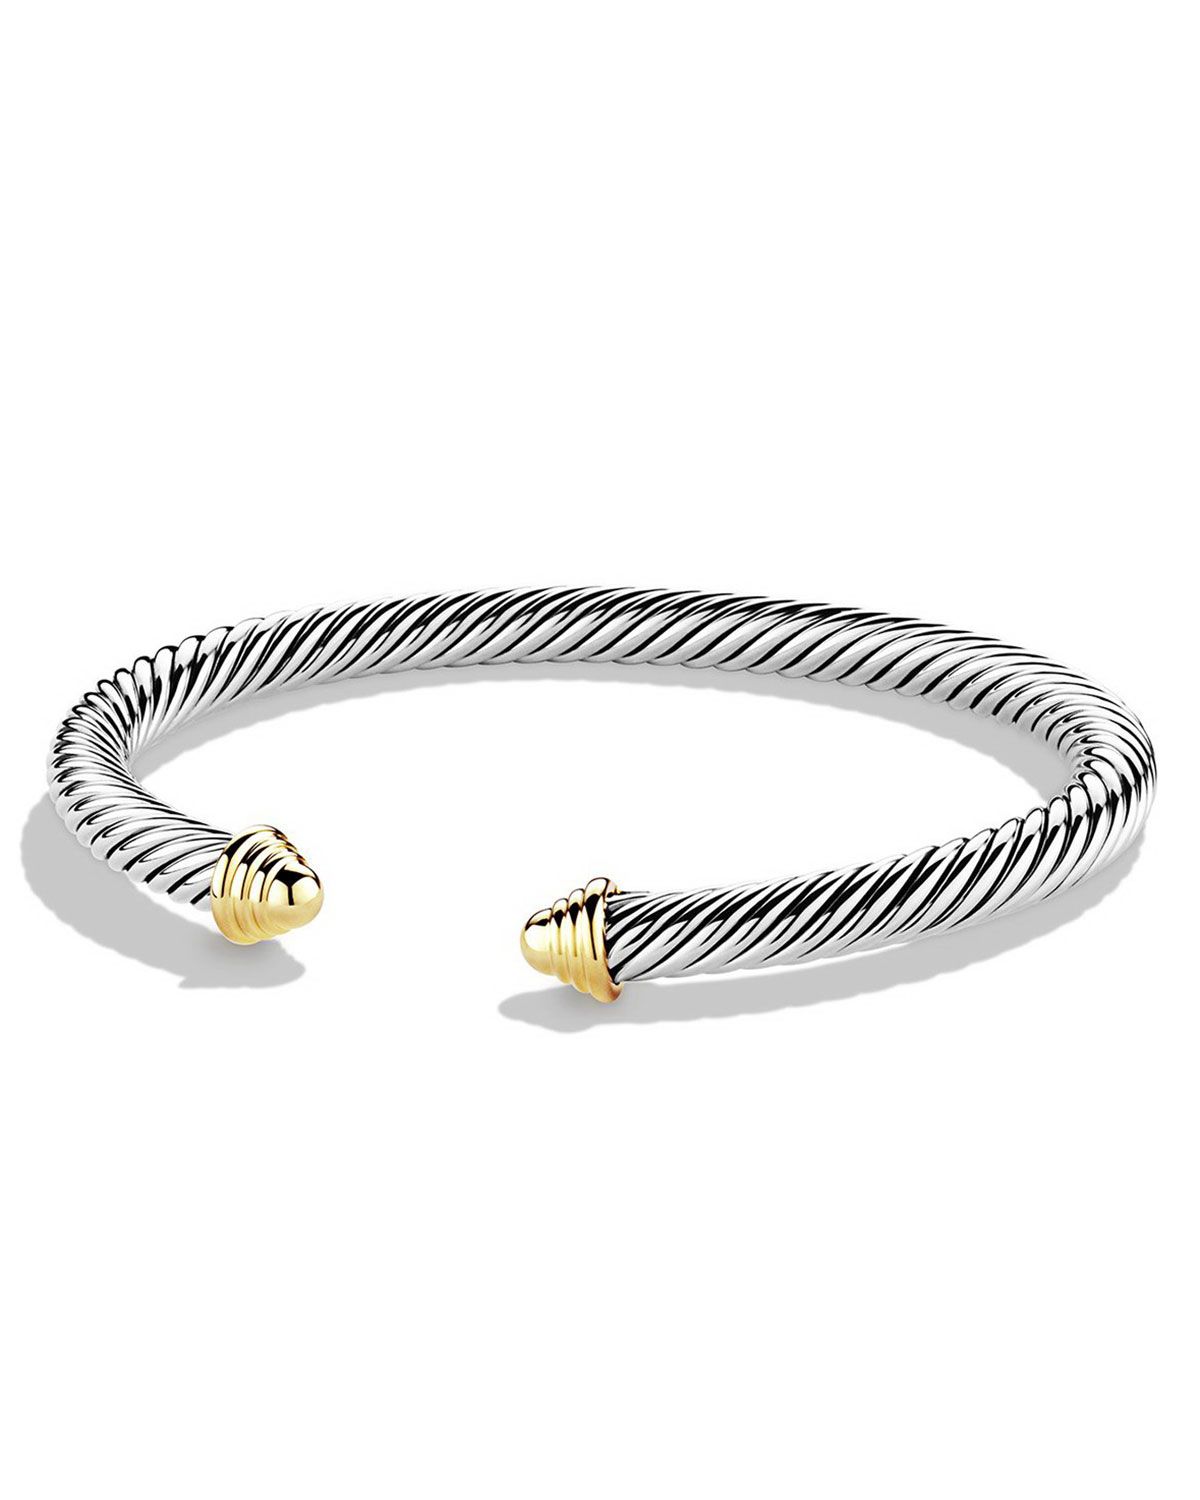 5mm Thoroughbred Cable Bracelet | Neiman Marcus